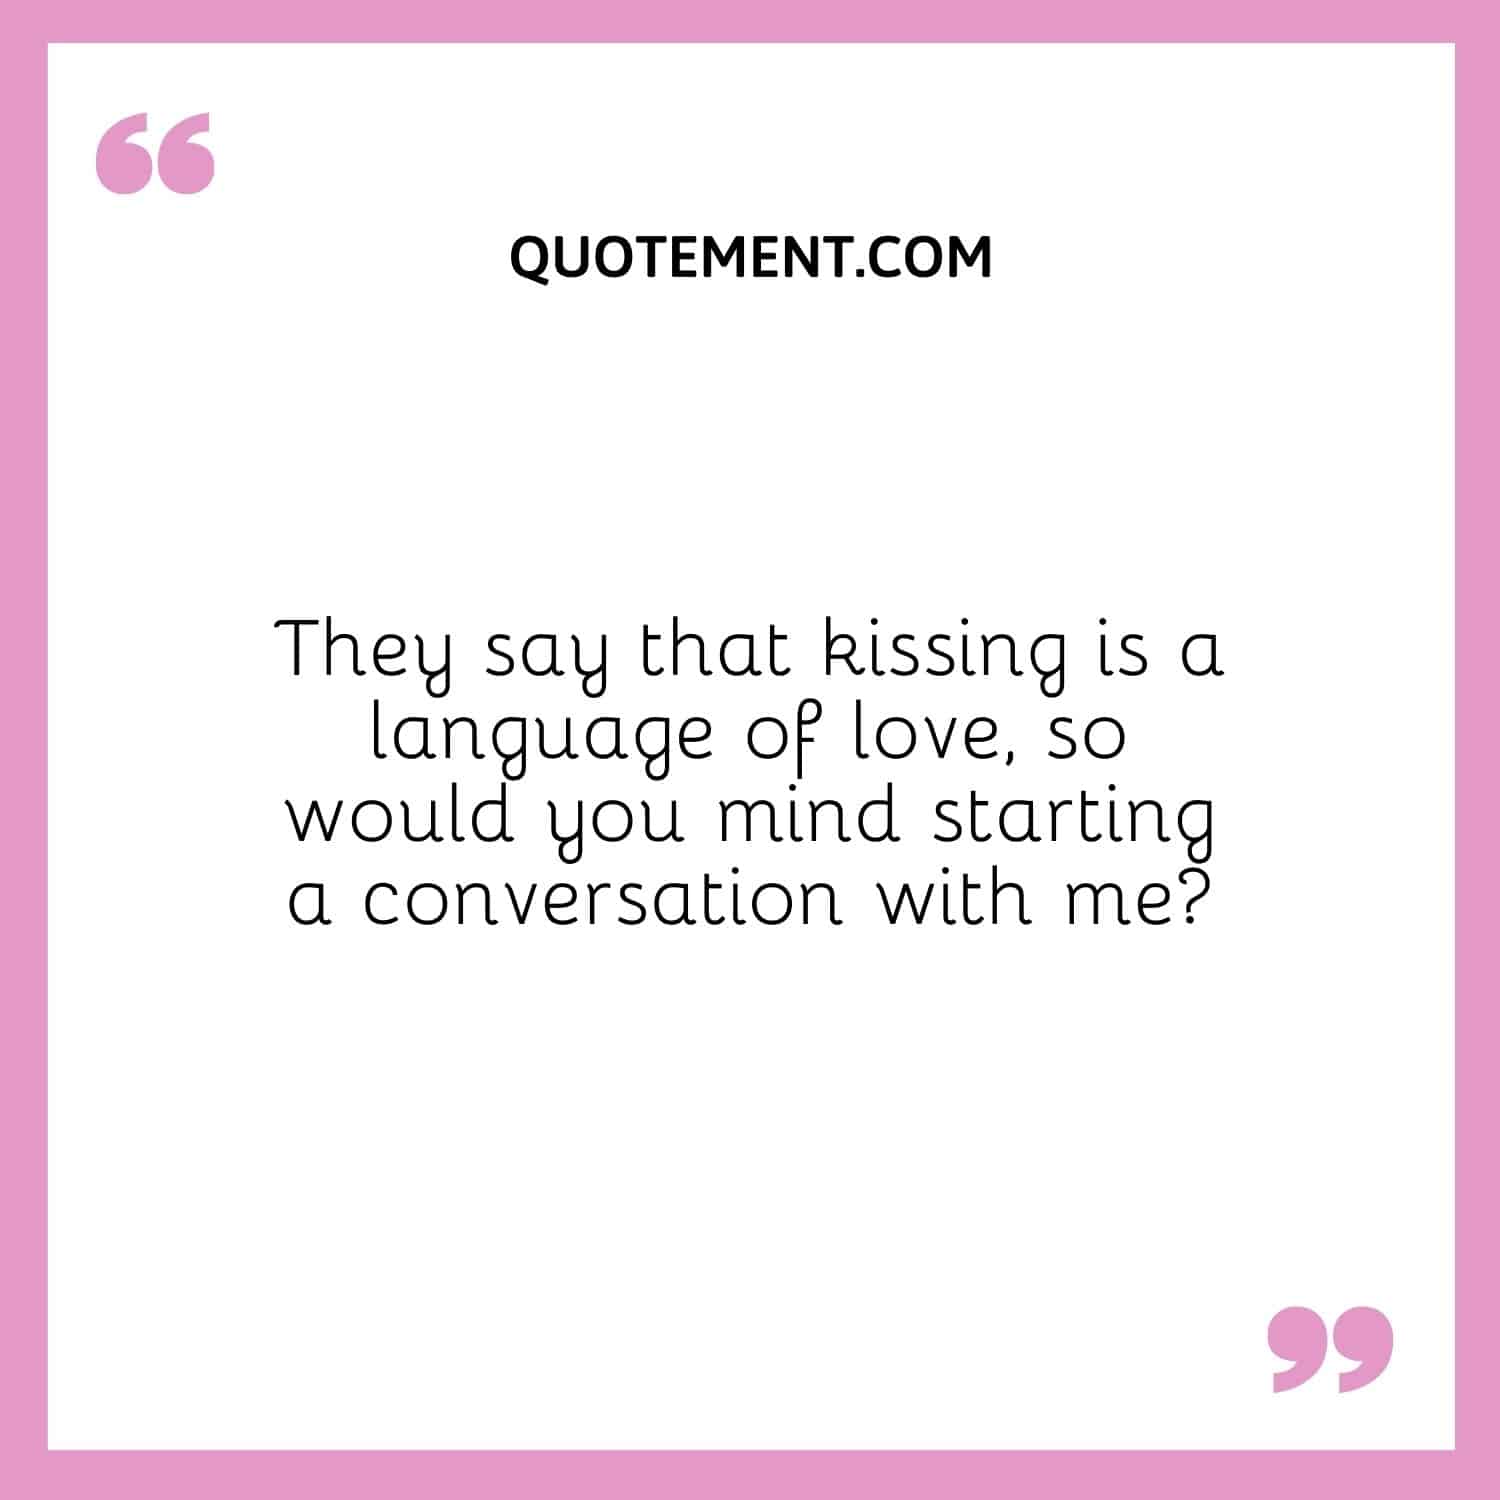 They say that kissing is a language of love, so would you mind starting a conversation with me